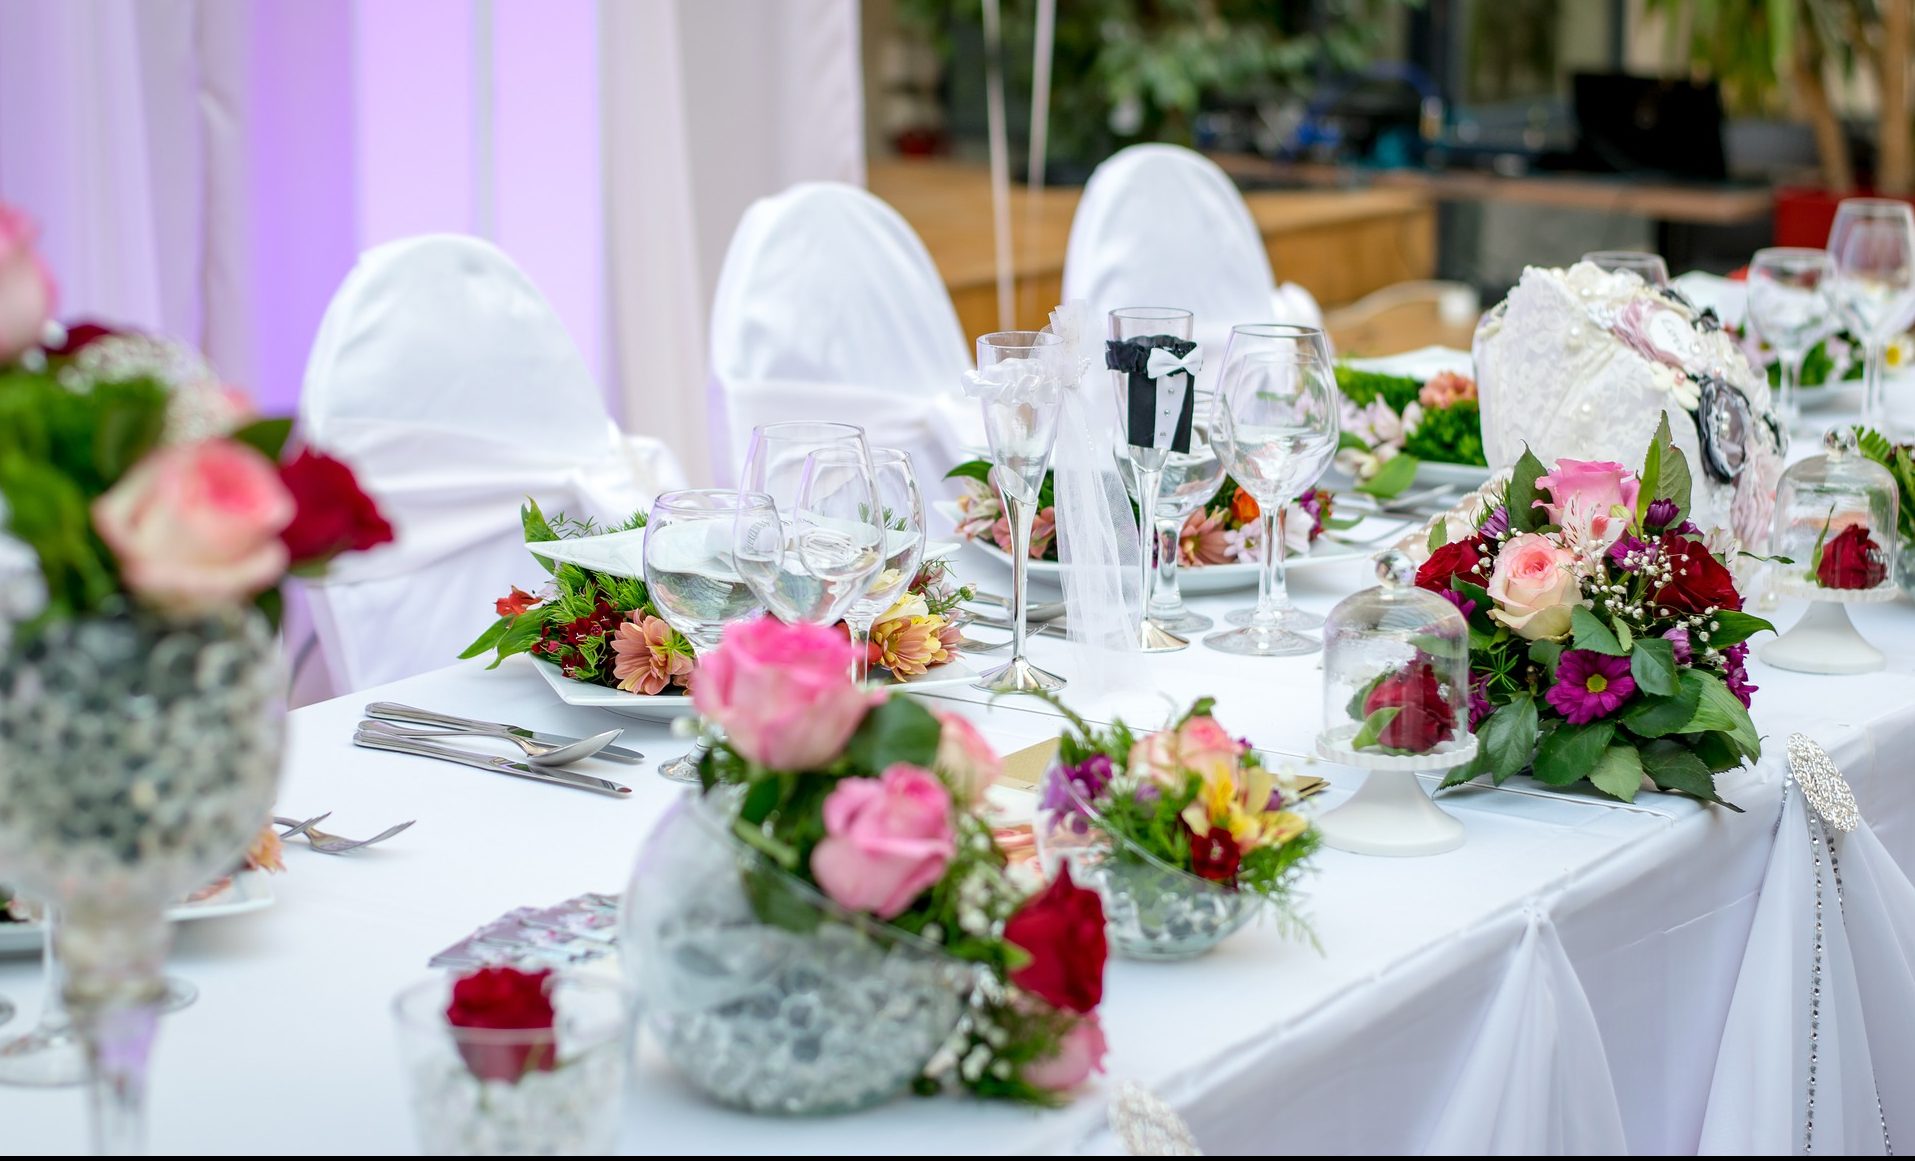 4 Dietary Requirements You May Need To Cater For At Your Wedding